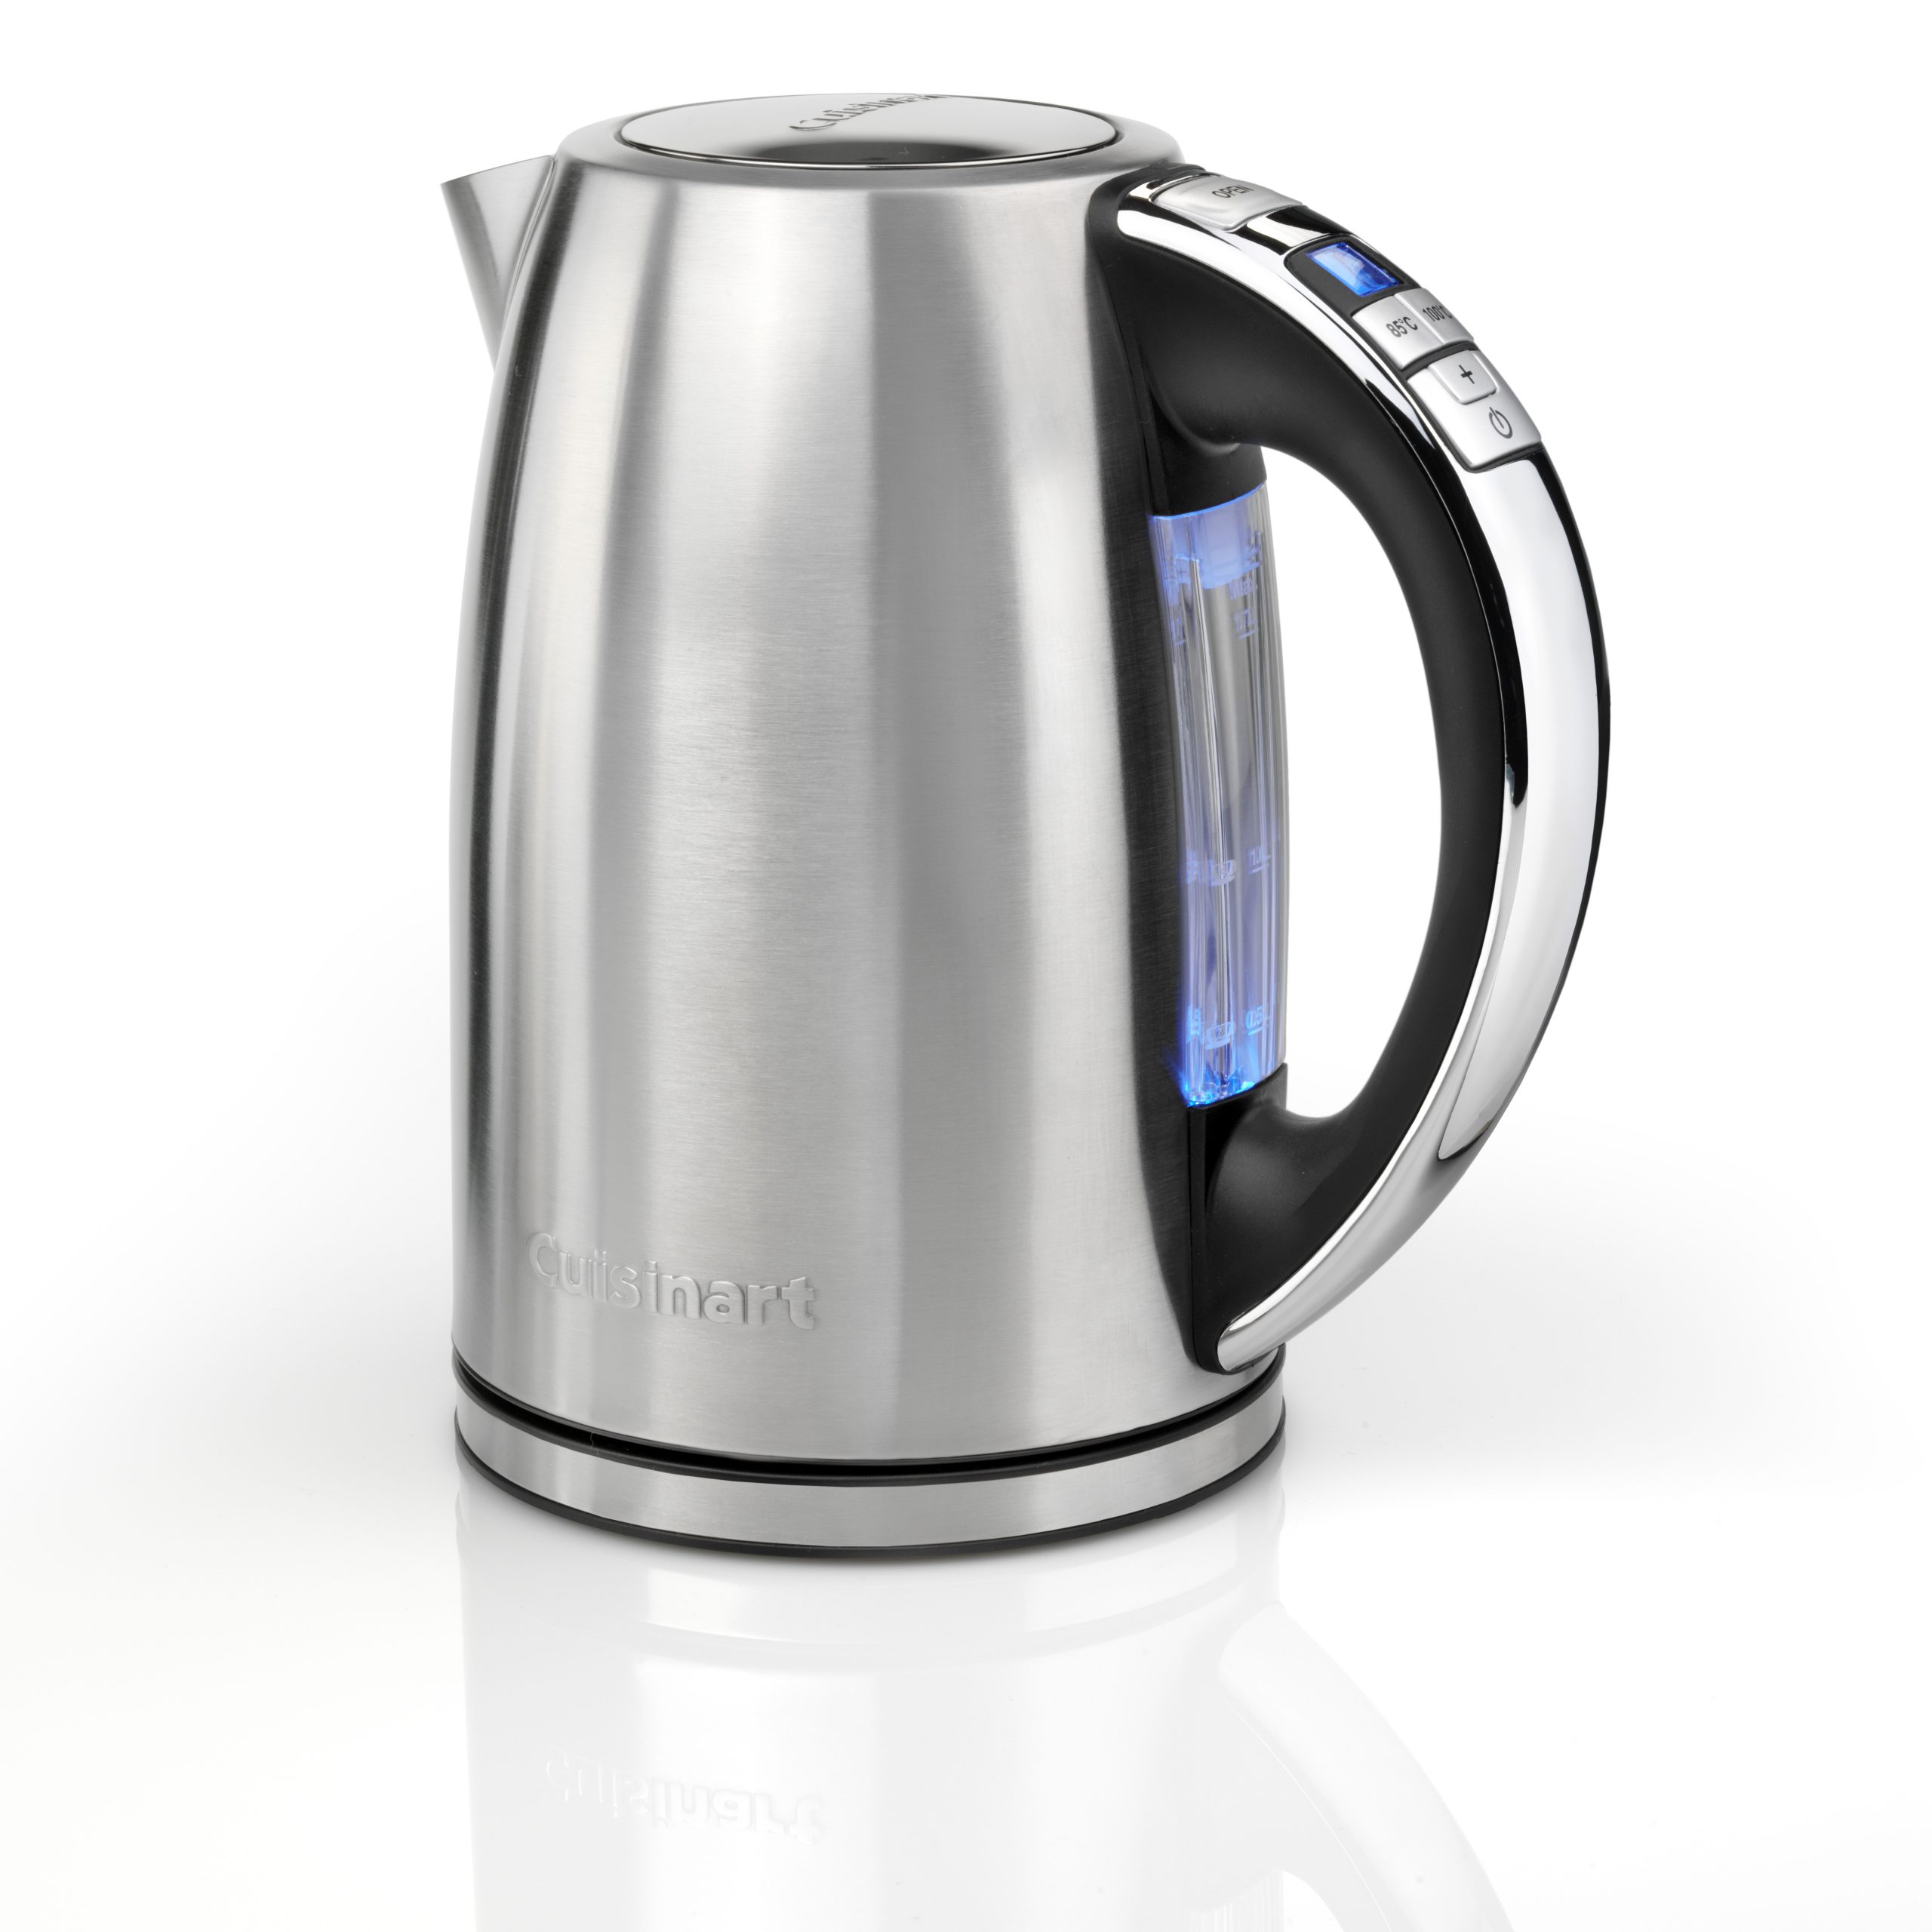 Signature Collection Multi-Temp Kettle - Brushed Steel